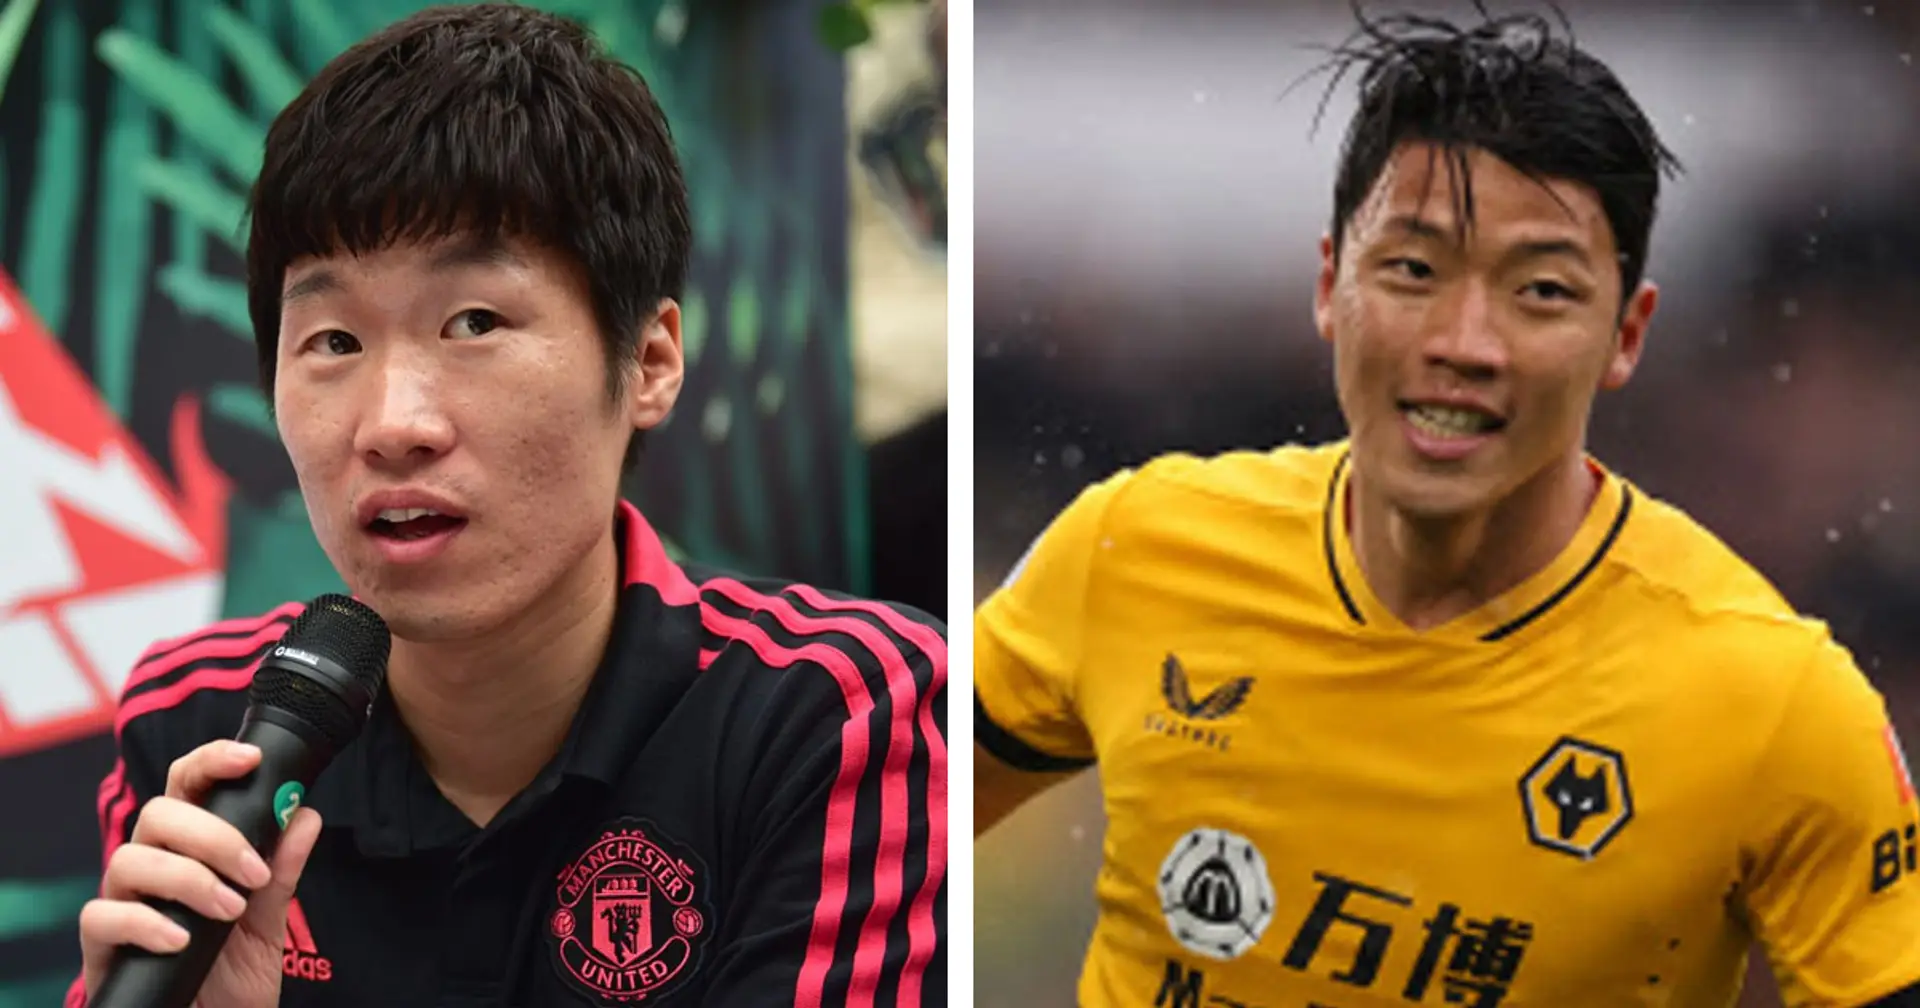 'It causes discomfort to Korean people': Park Ji-Sung pleads United fans to stop singing racist song